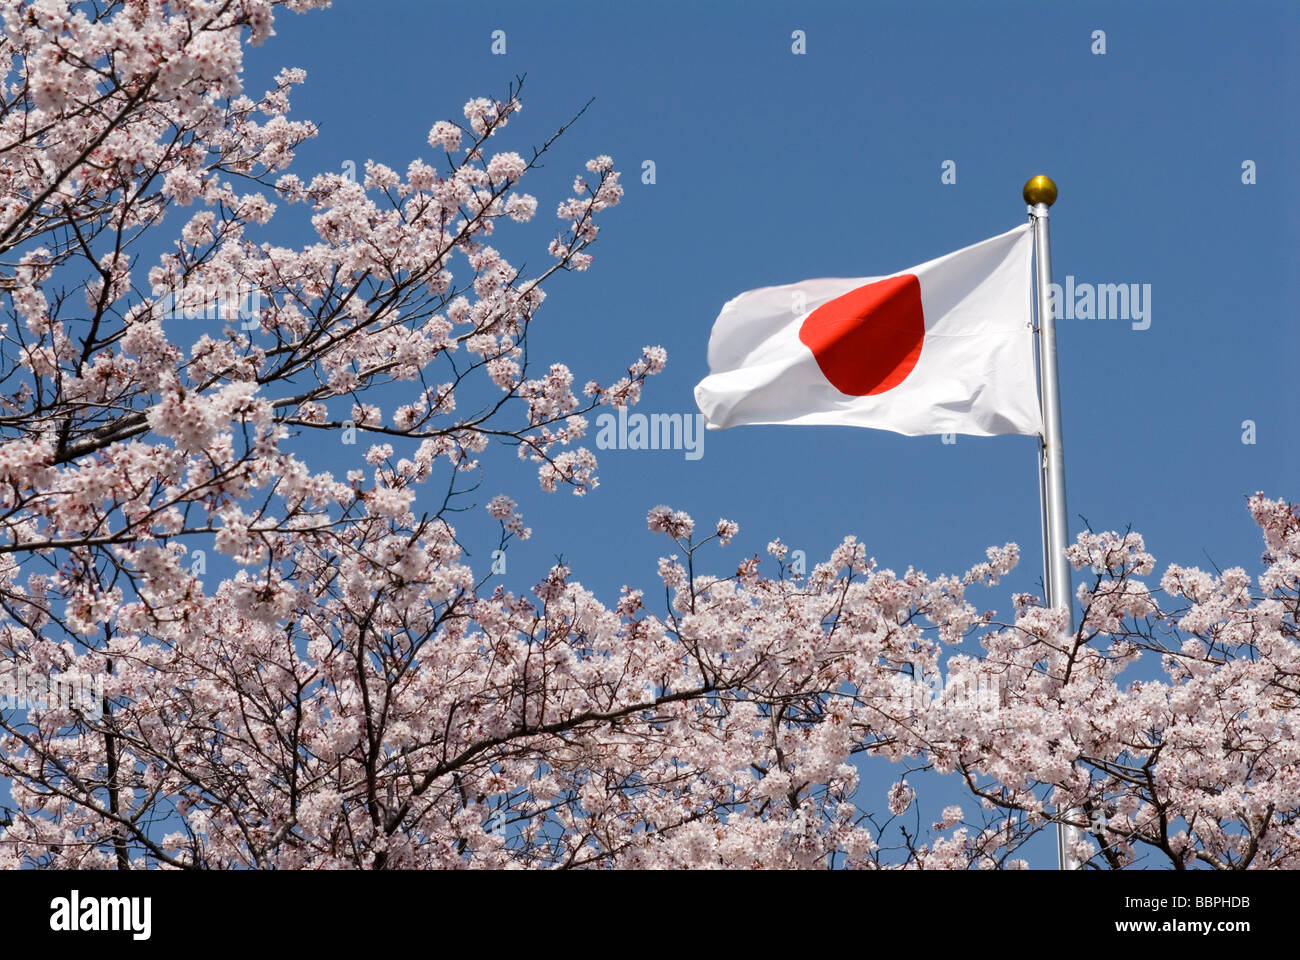 The hinomaru, or national flag of Japan, is surrounded by flowering cherry trees Stock Photo